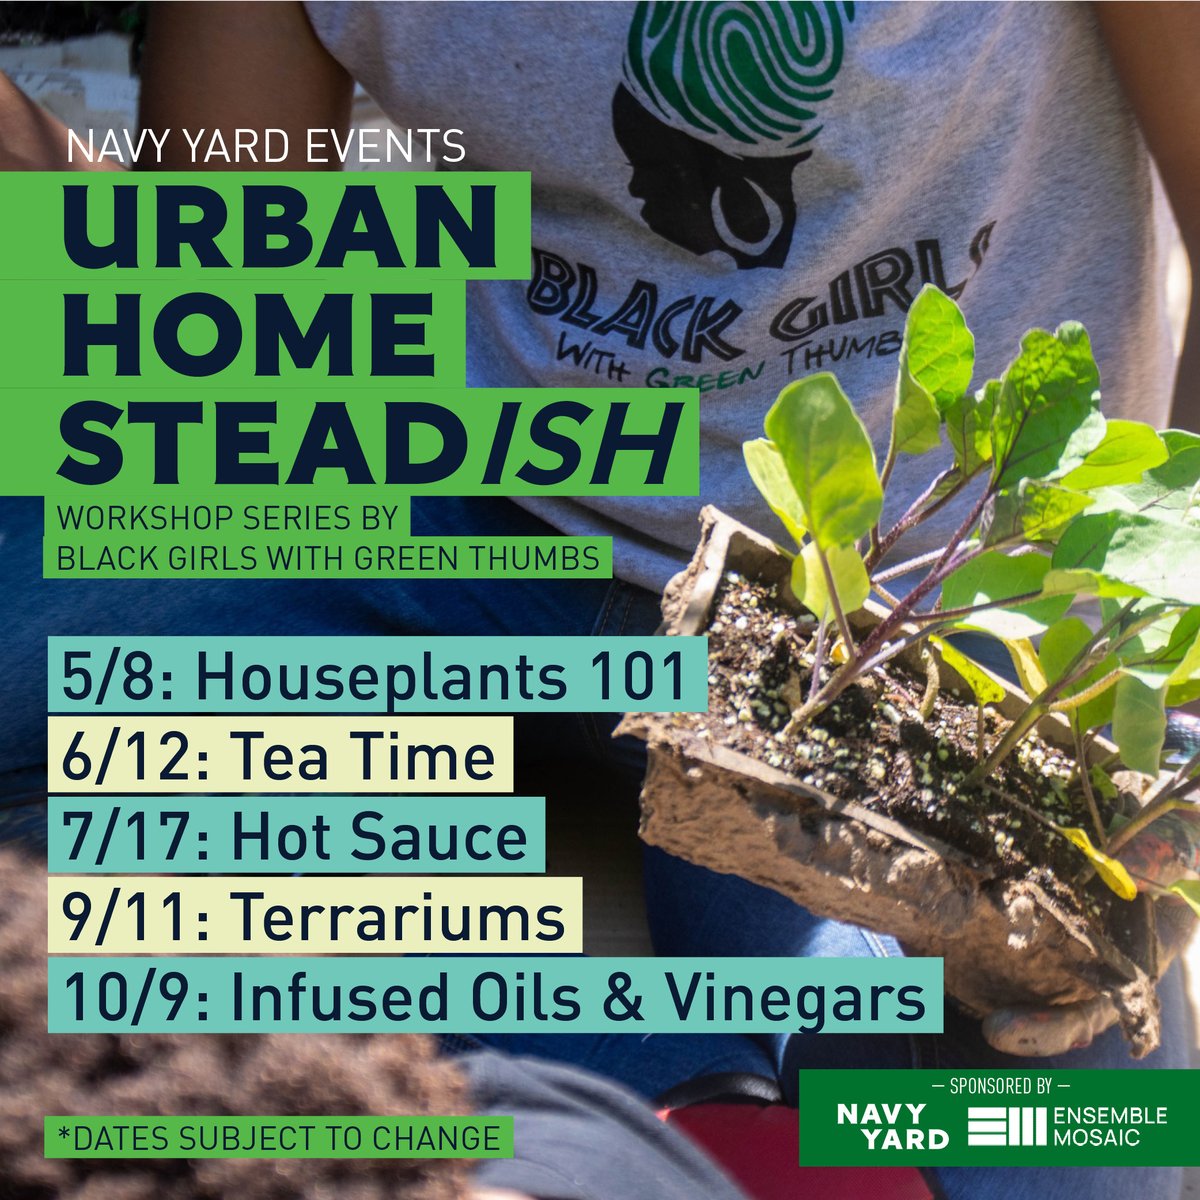 Many people are fascinated by sustainable living practices, yet feel it may be too large a lift. Come check out our URBAN HOMESTEADish program to teach you ways! This program is free but must register. Events page link in bio. #discovertheyard #navyyardphilly #navyyardprograms